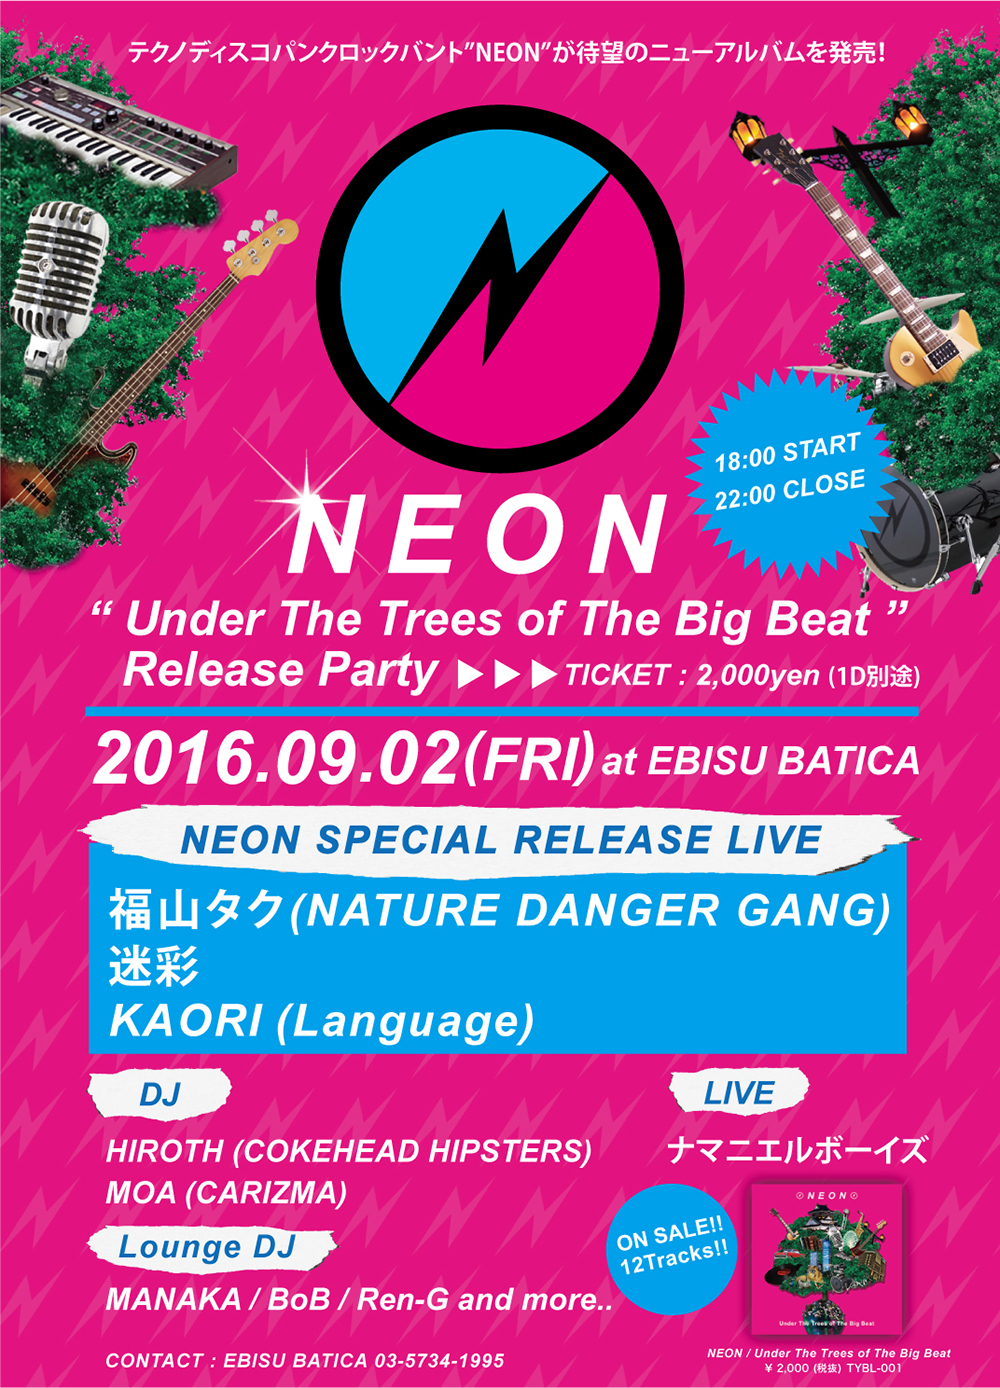 2016/09/02　NEON “Under The Trees of The Big Beat” Release Party！！